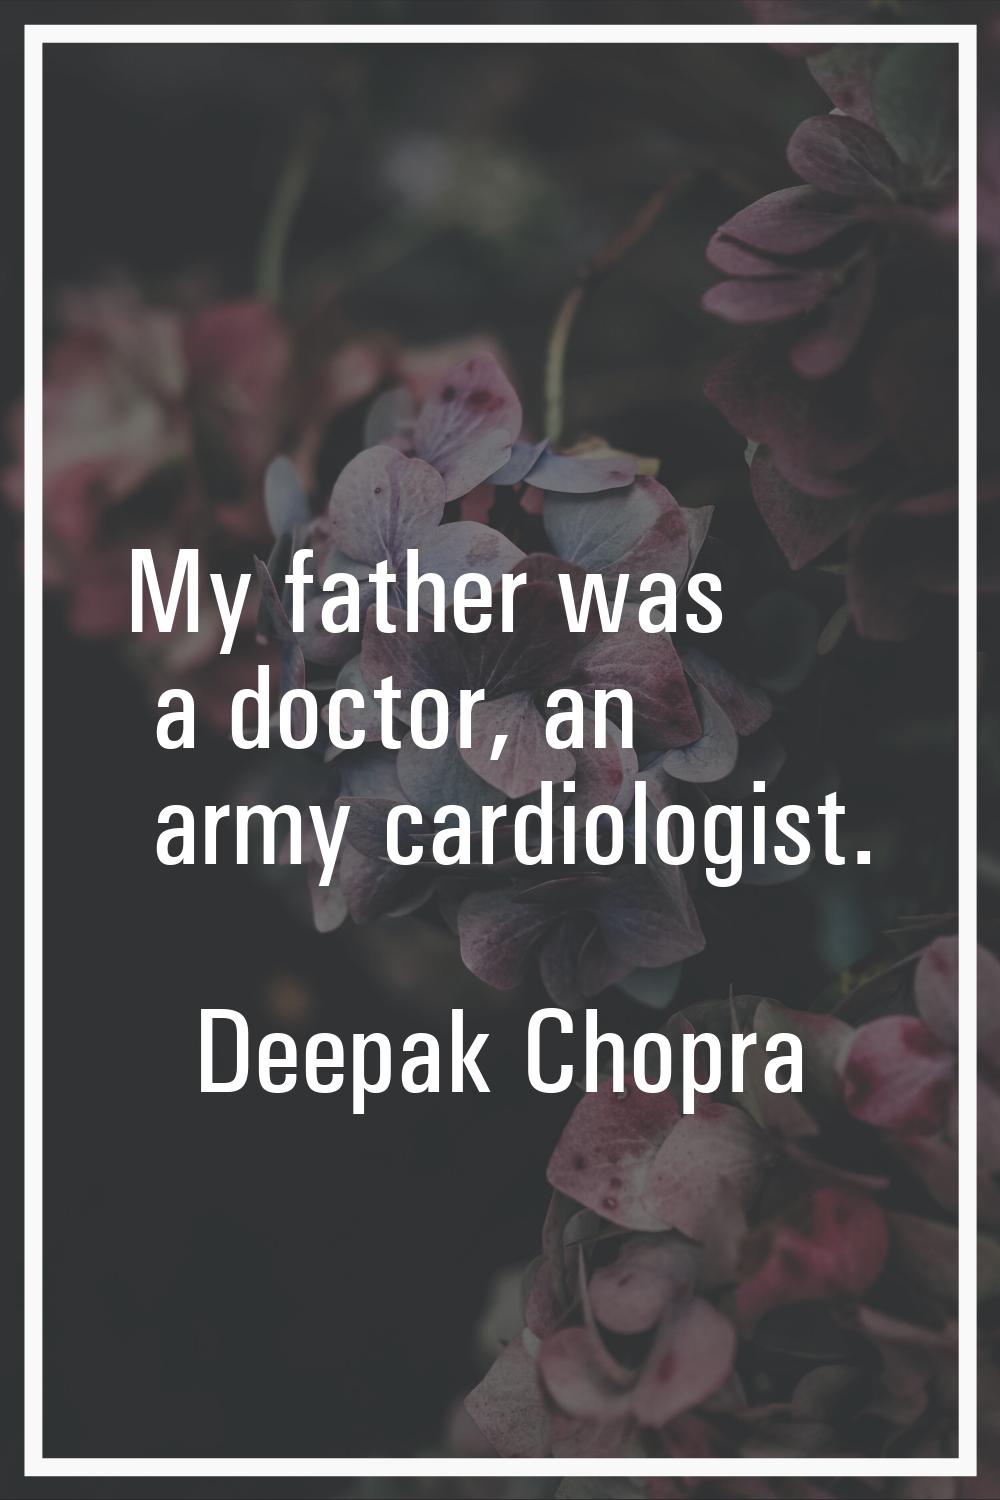 My father was a doctor, an army cardiologist.